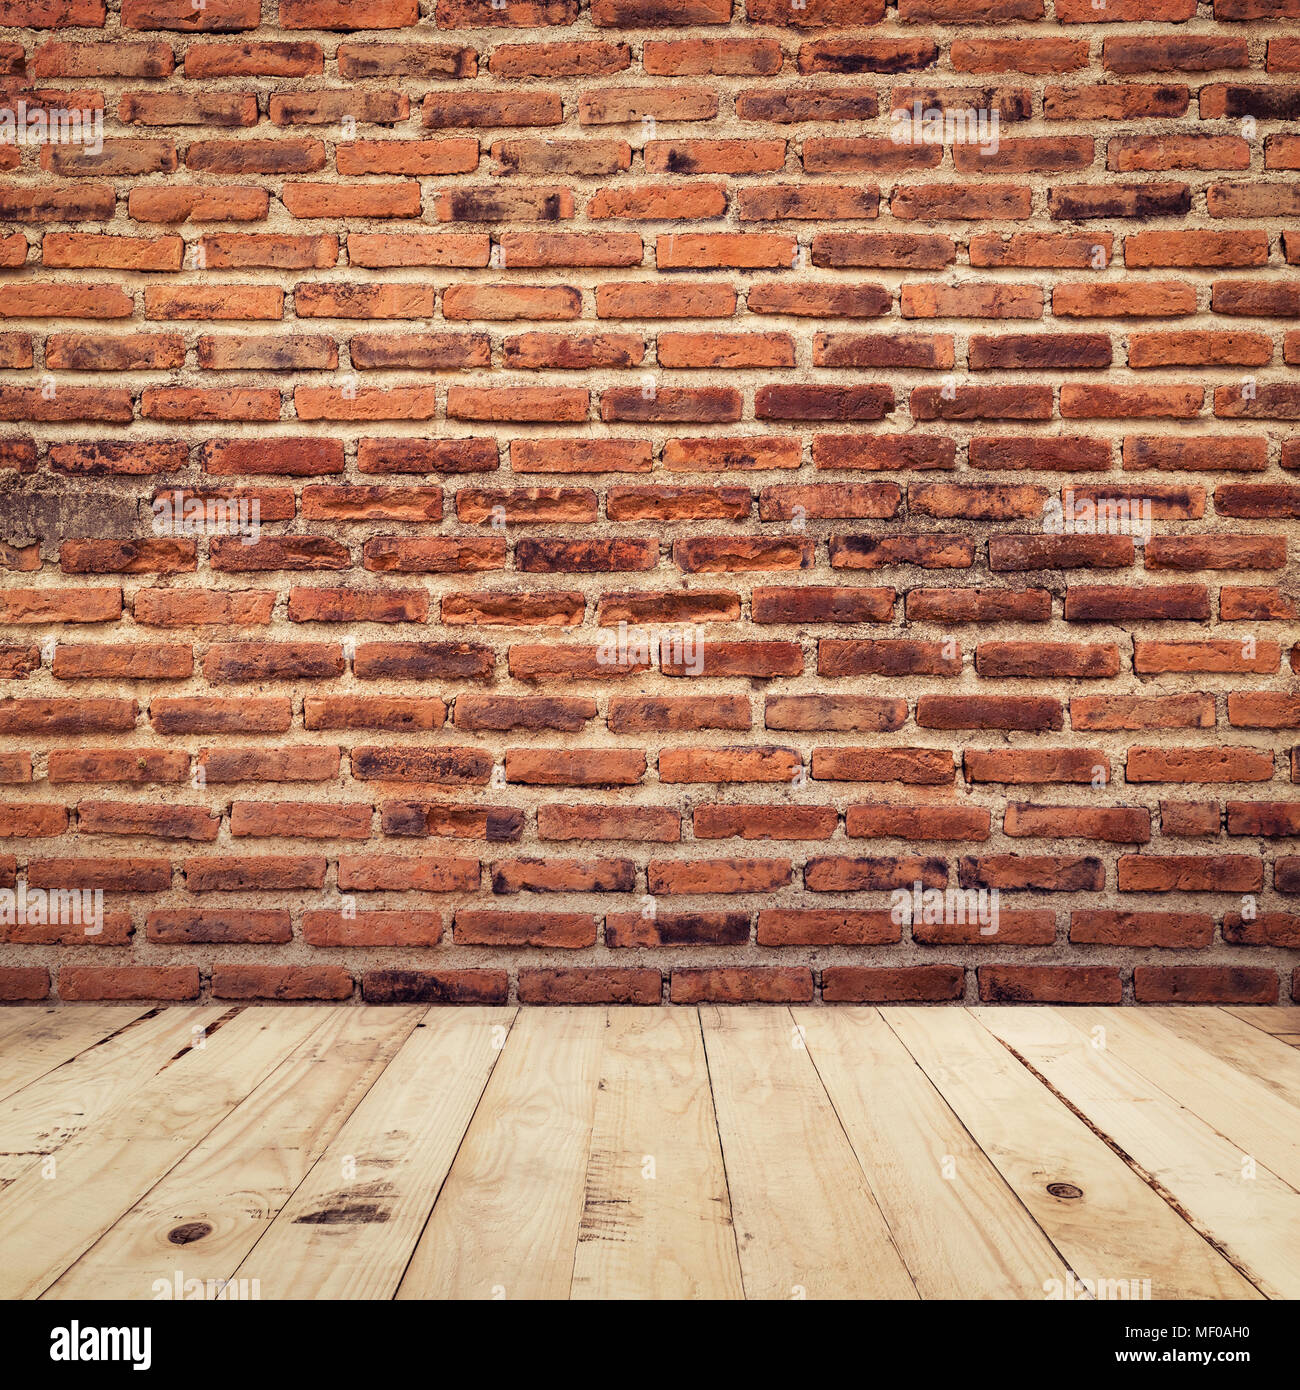 old brick and wood floor perspective interior room background with vintage toned. Stock Photo